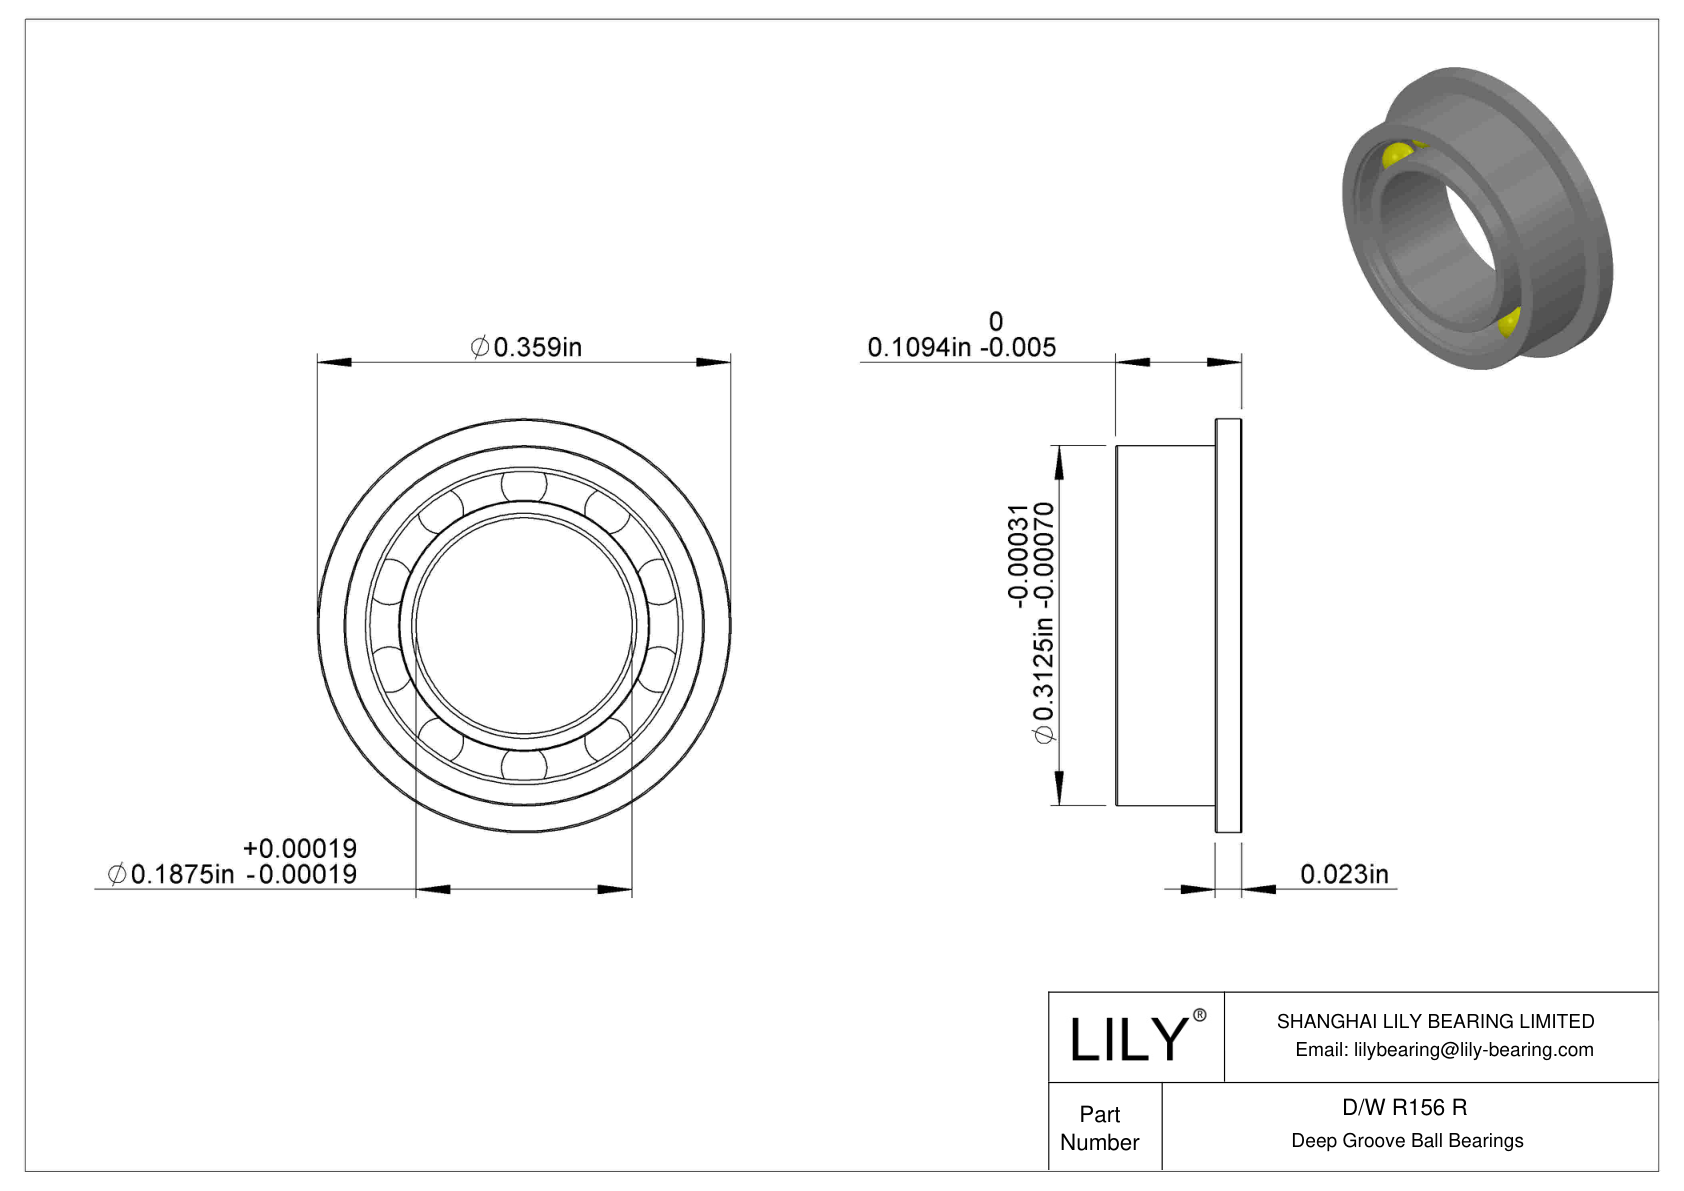 D/W R156 R Flanged Ball Bearings cad drawing